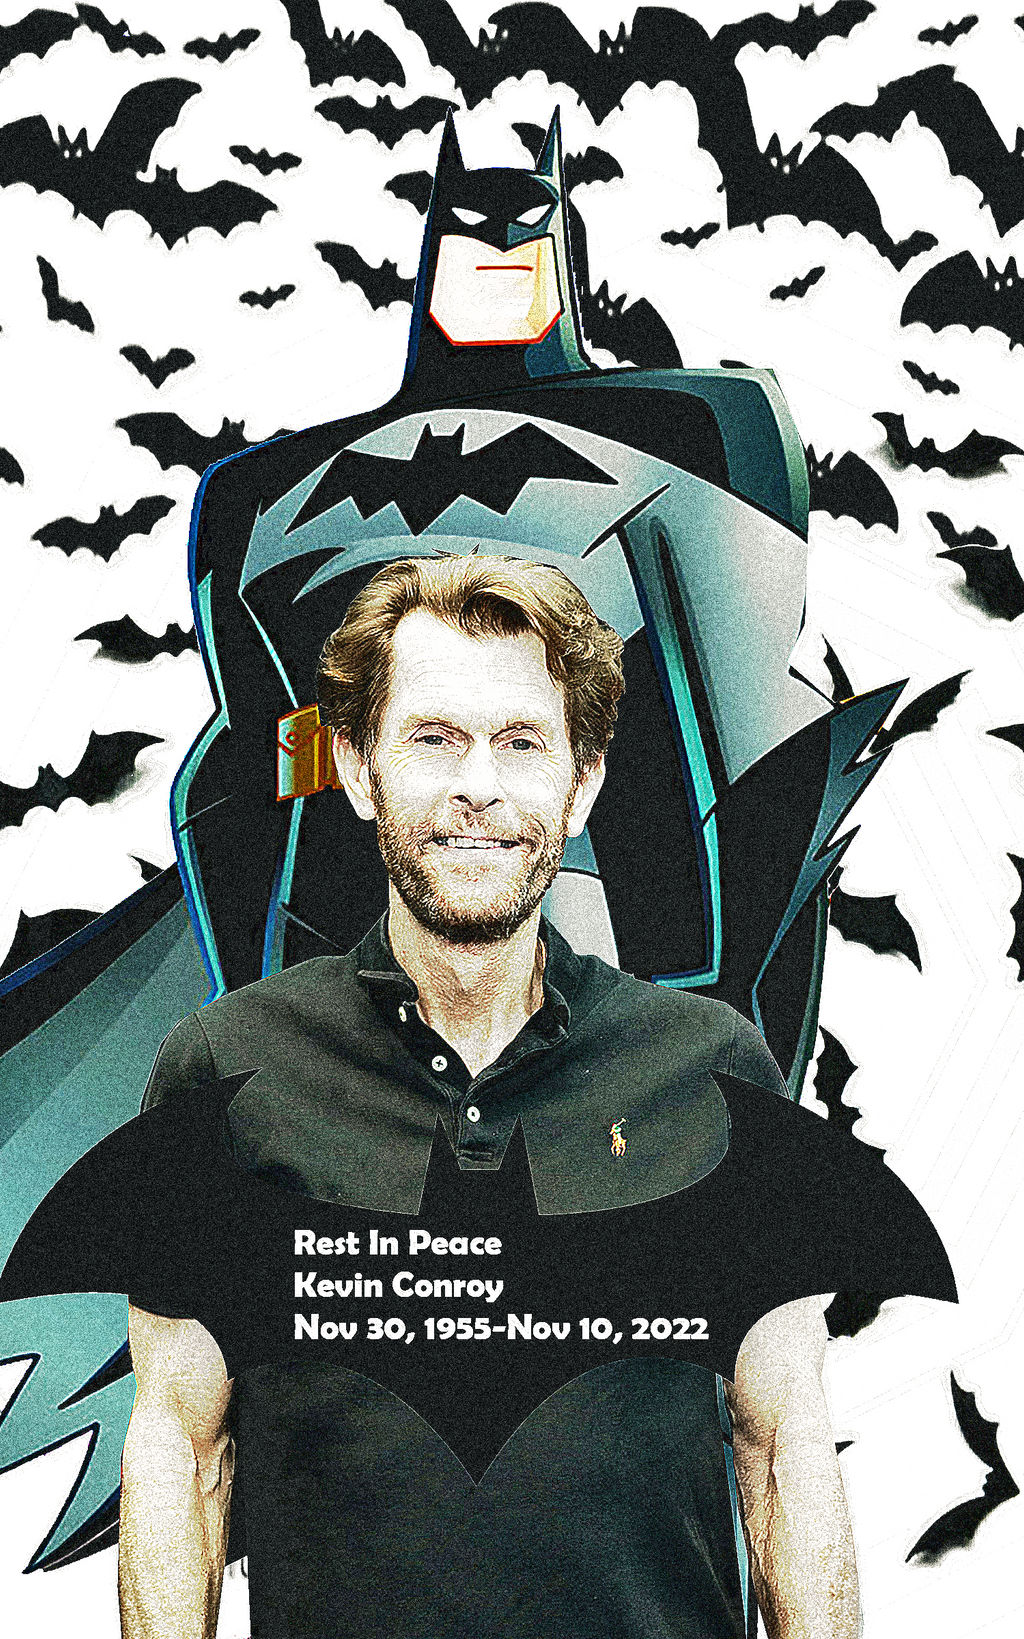 File:Kevin Conroy (46802454494).jpg - Wikimedia Commons